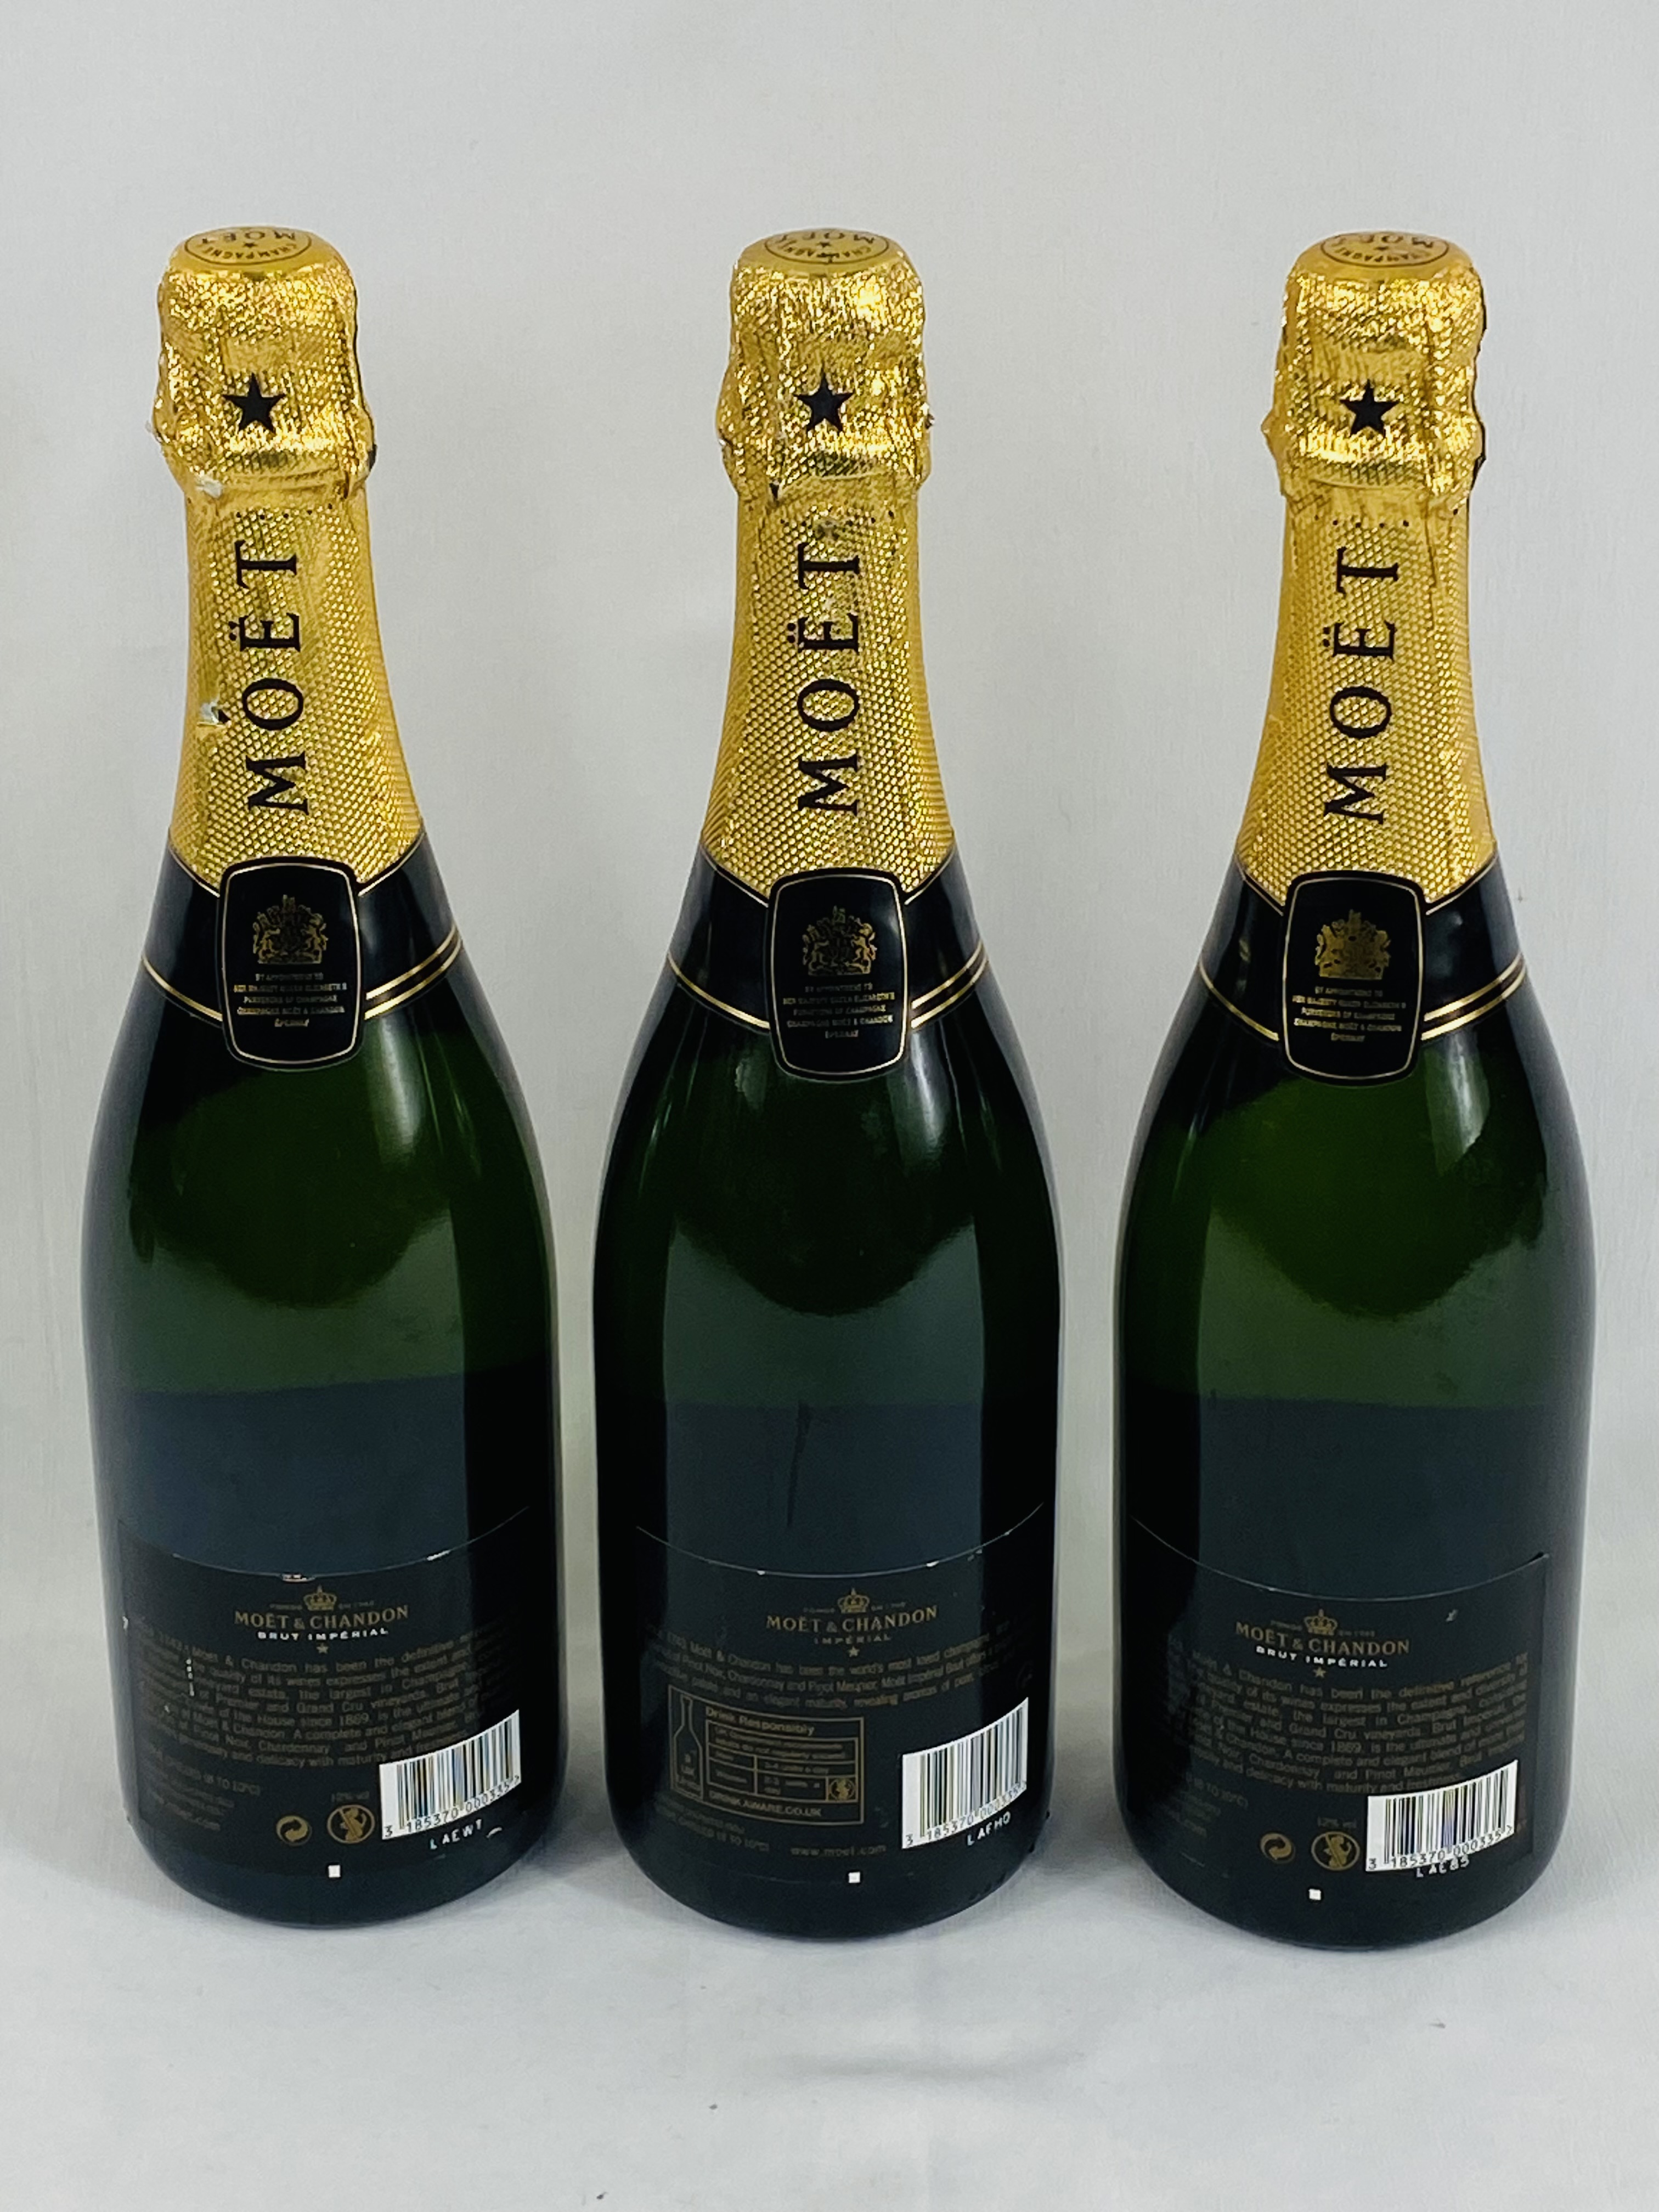 Three 75cl bottles of Moet & Chandon Brut Imperial Non Vintage Champagne. - Image 2 of 2